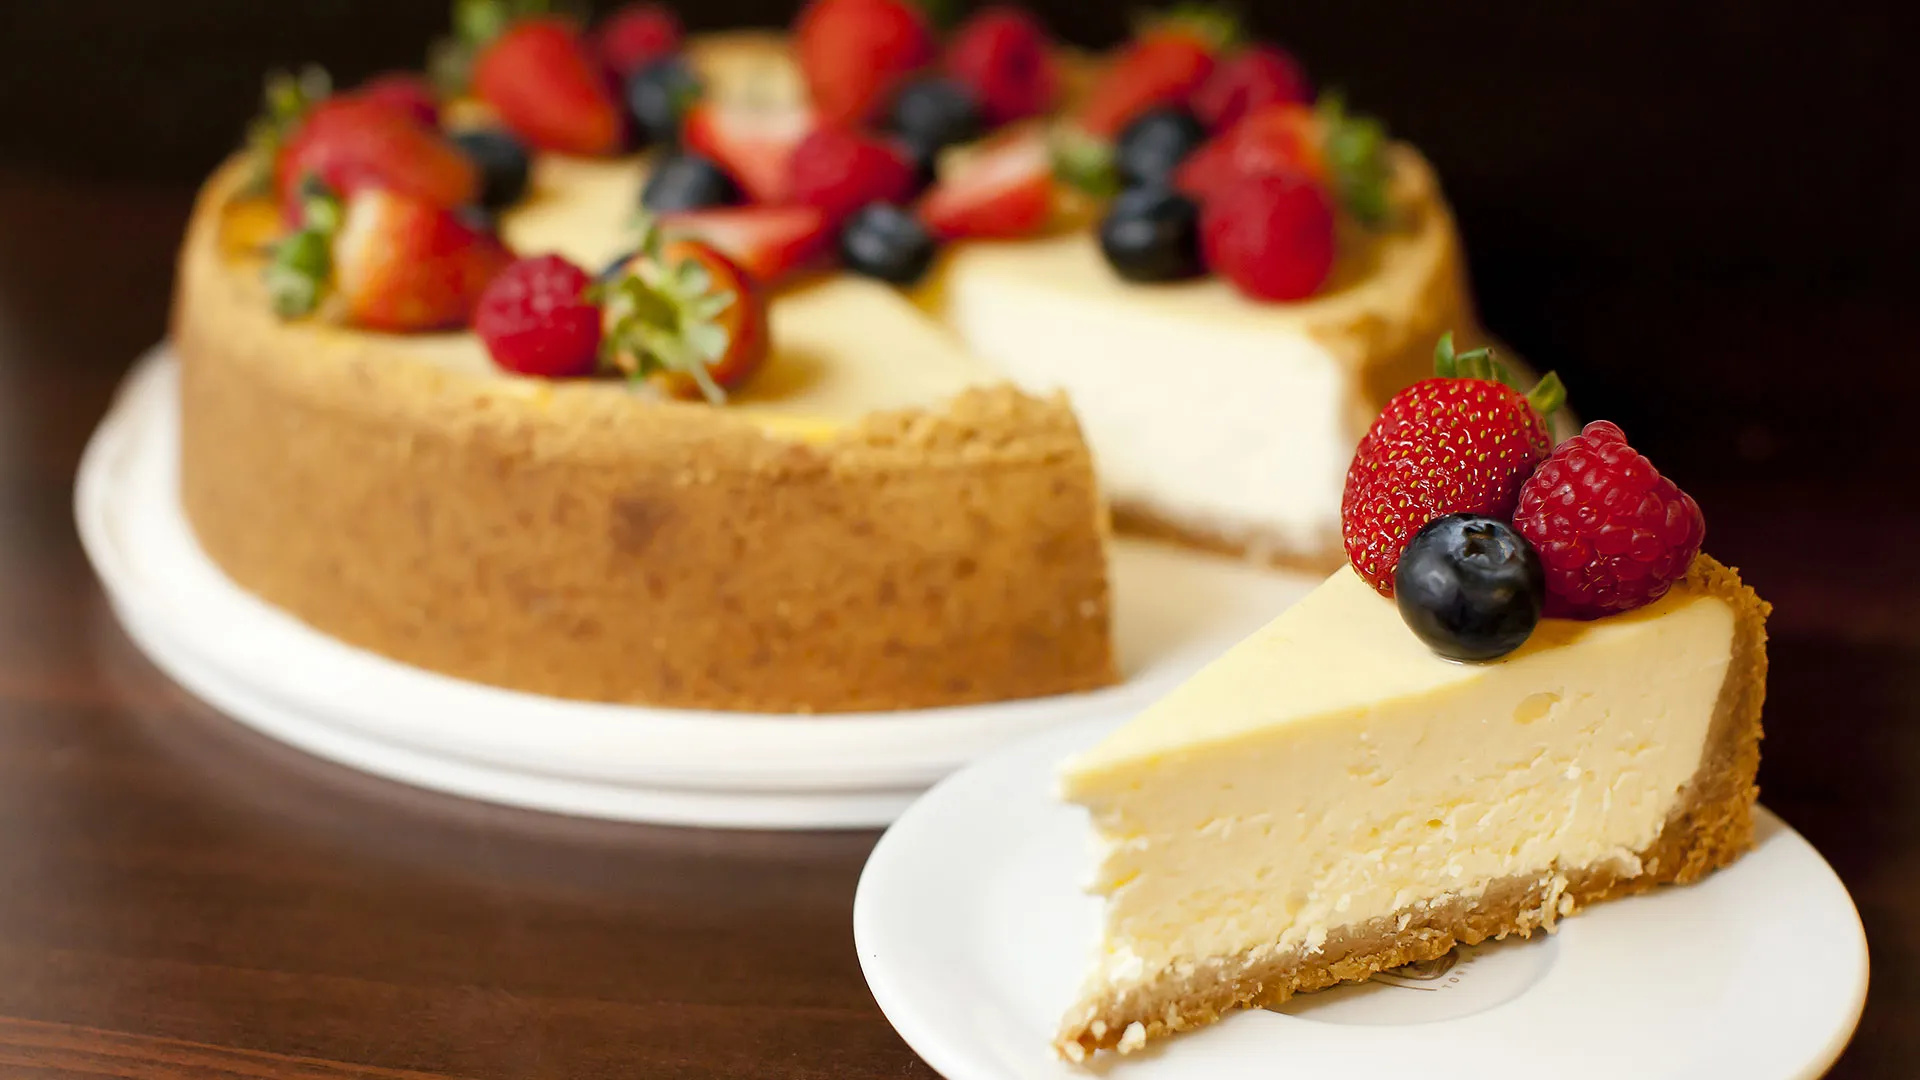 Cheesecake: Chilled and eaten cold, Strawberry, Blueberry. 1920x1080 Full HD Wallpaper.